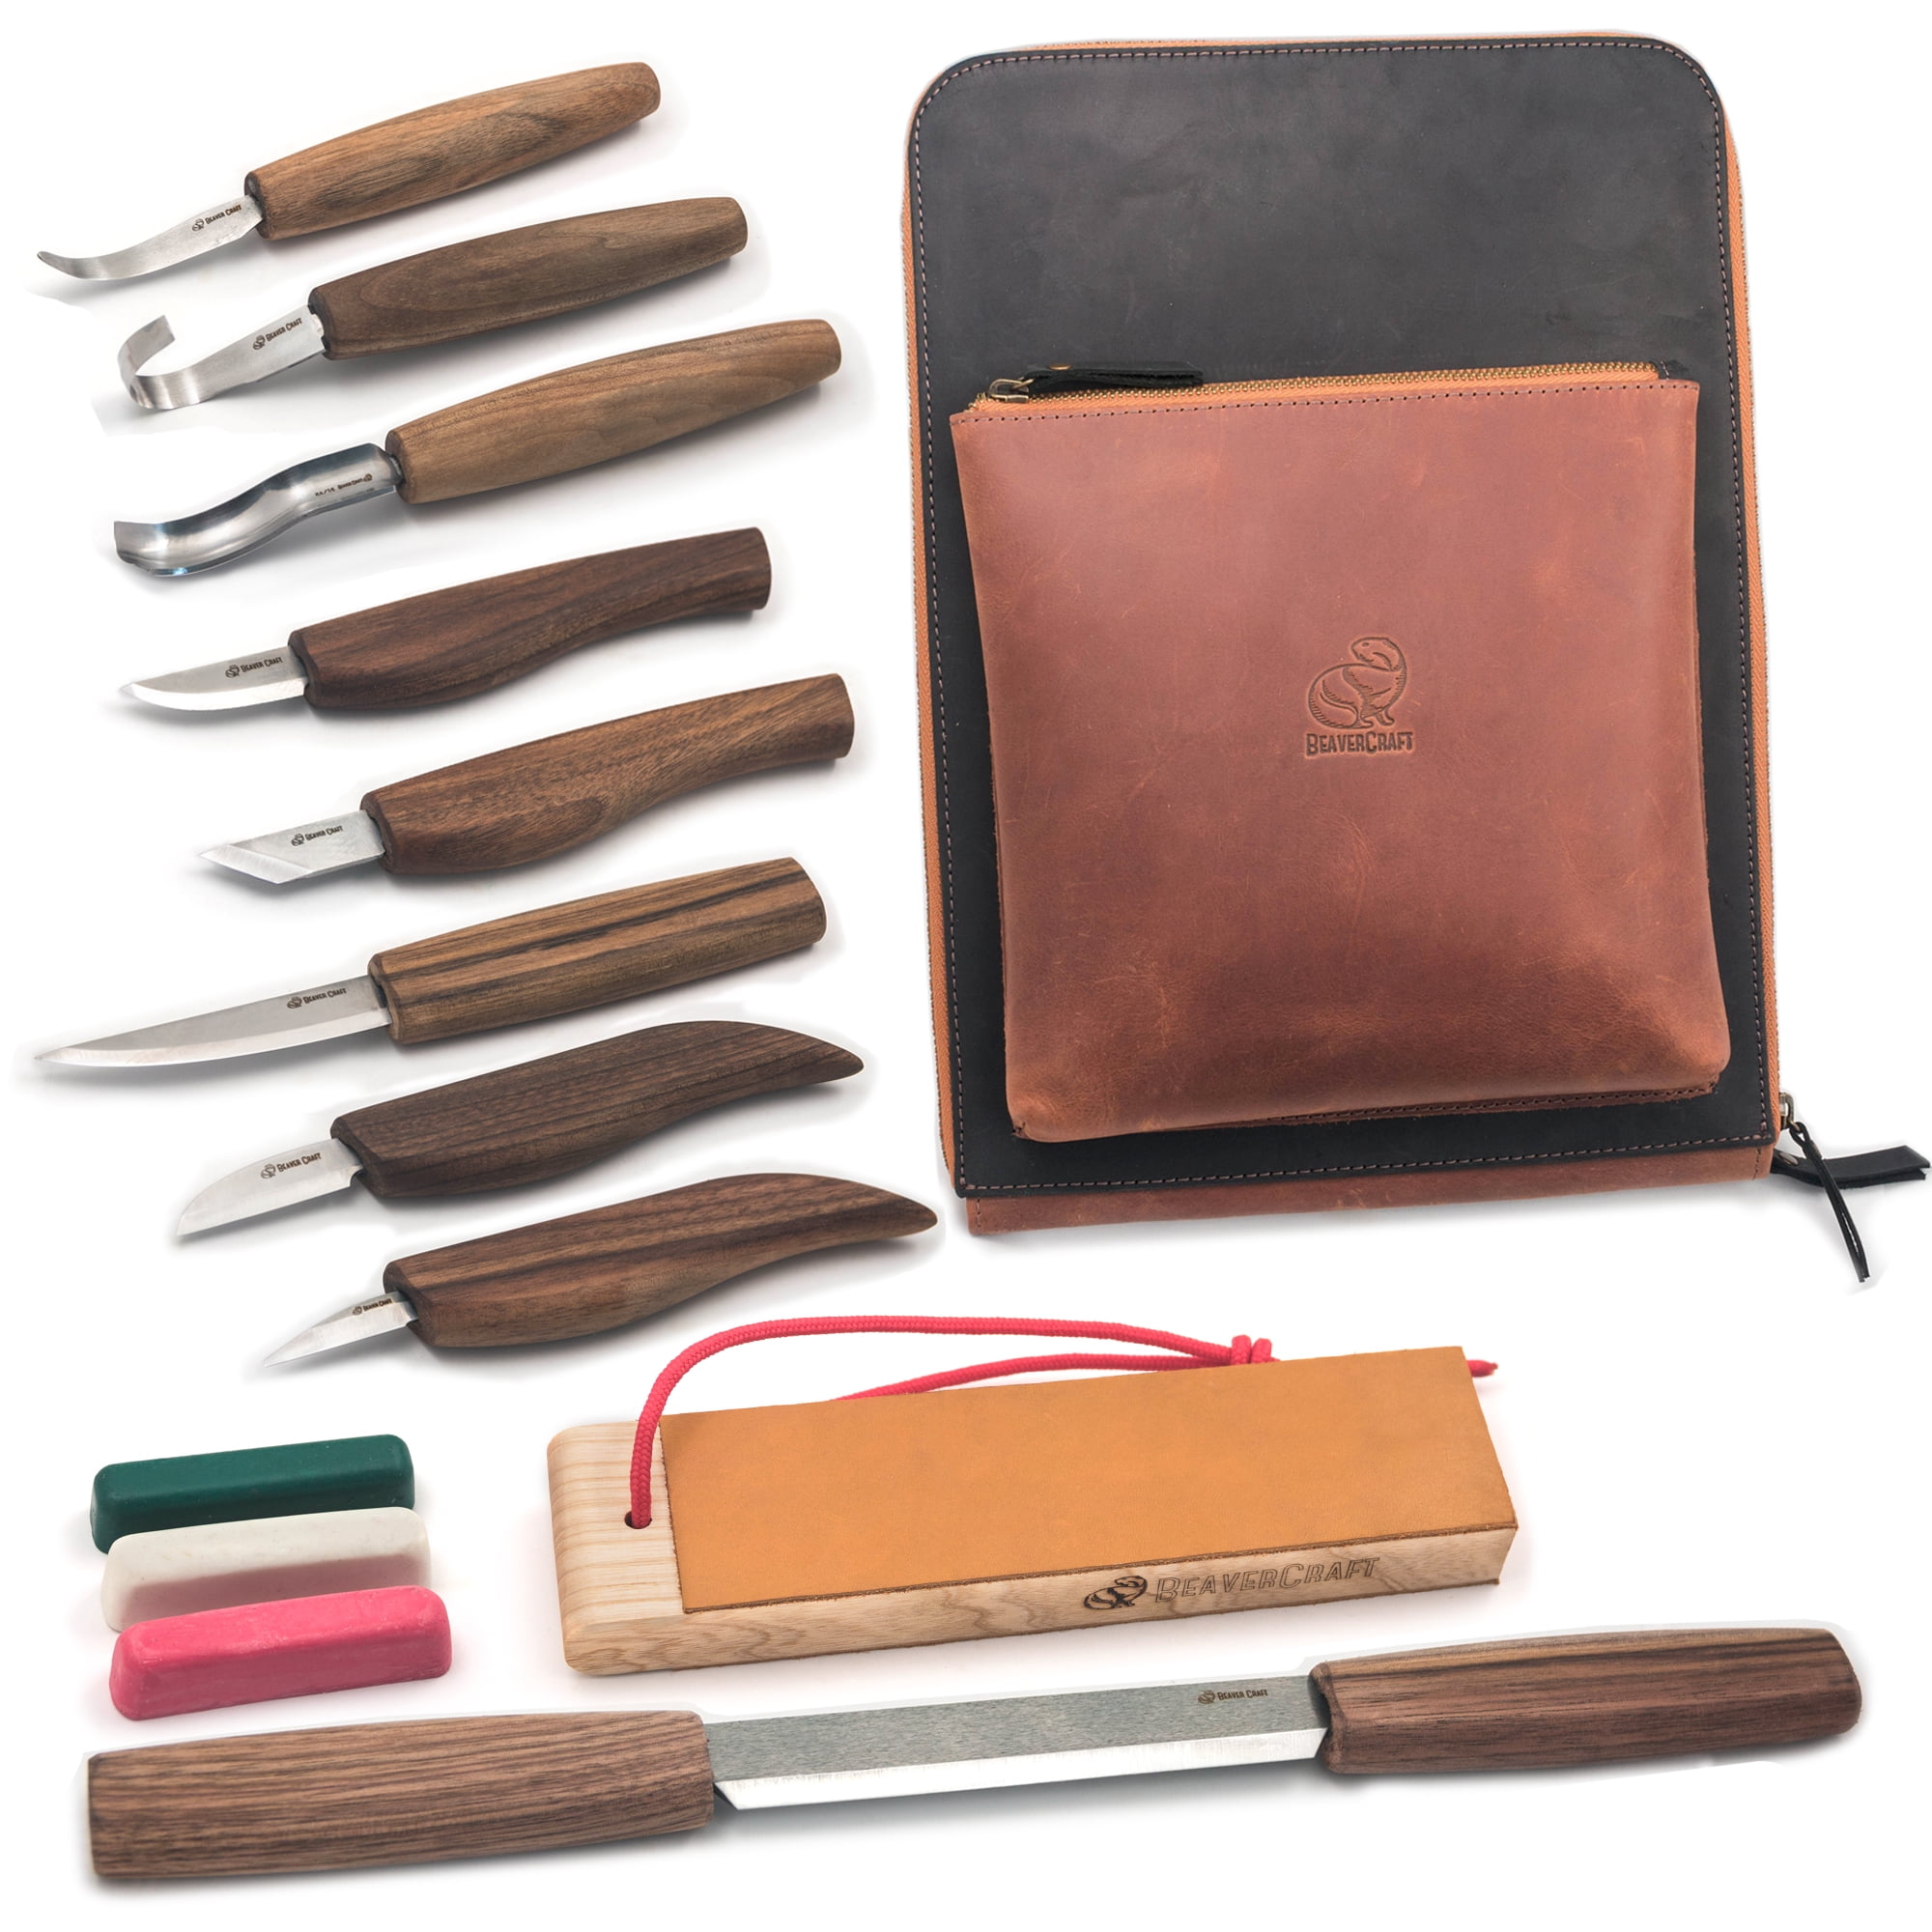 Wood Carving Tools Whittling Kit Woodworking Kit Whittling Kit Deluxe Spoon  Carving Knife Kits Fit For Beginners - AliExpress